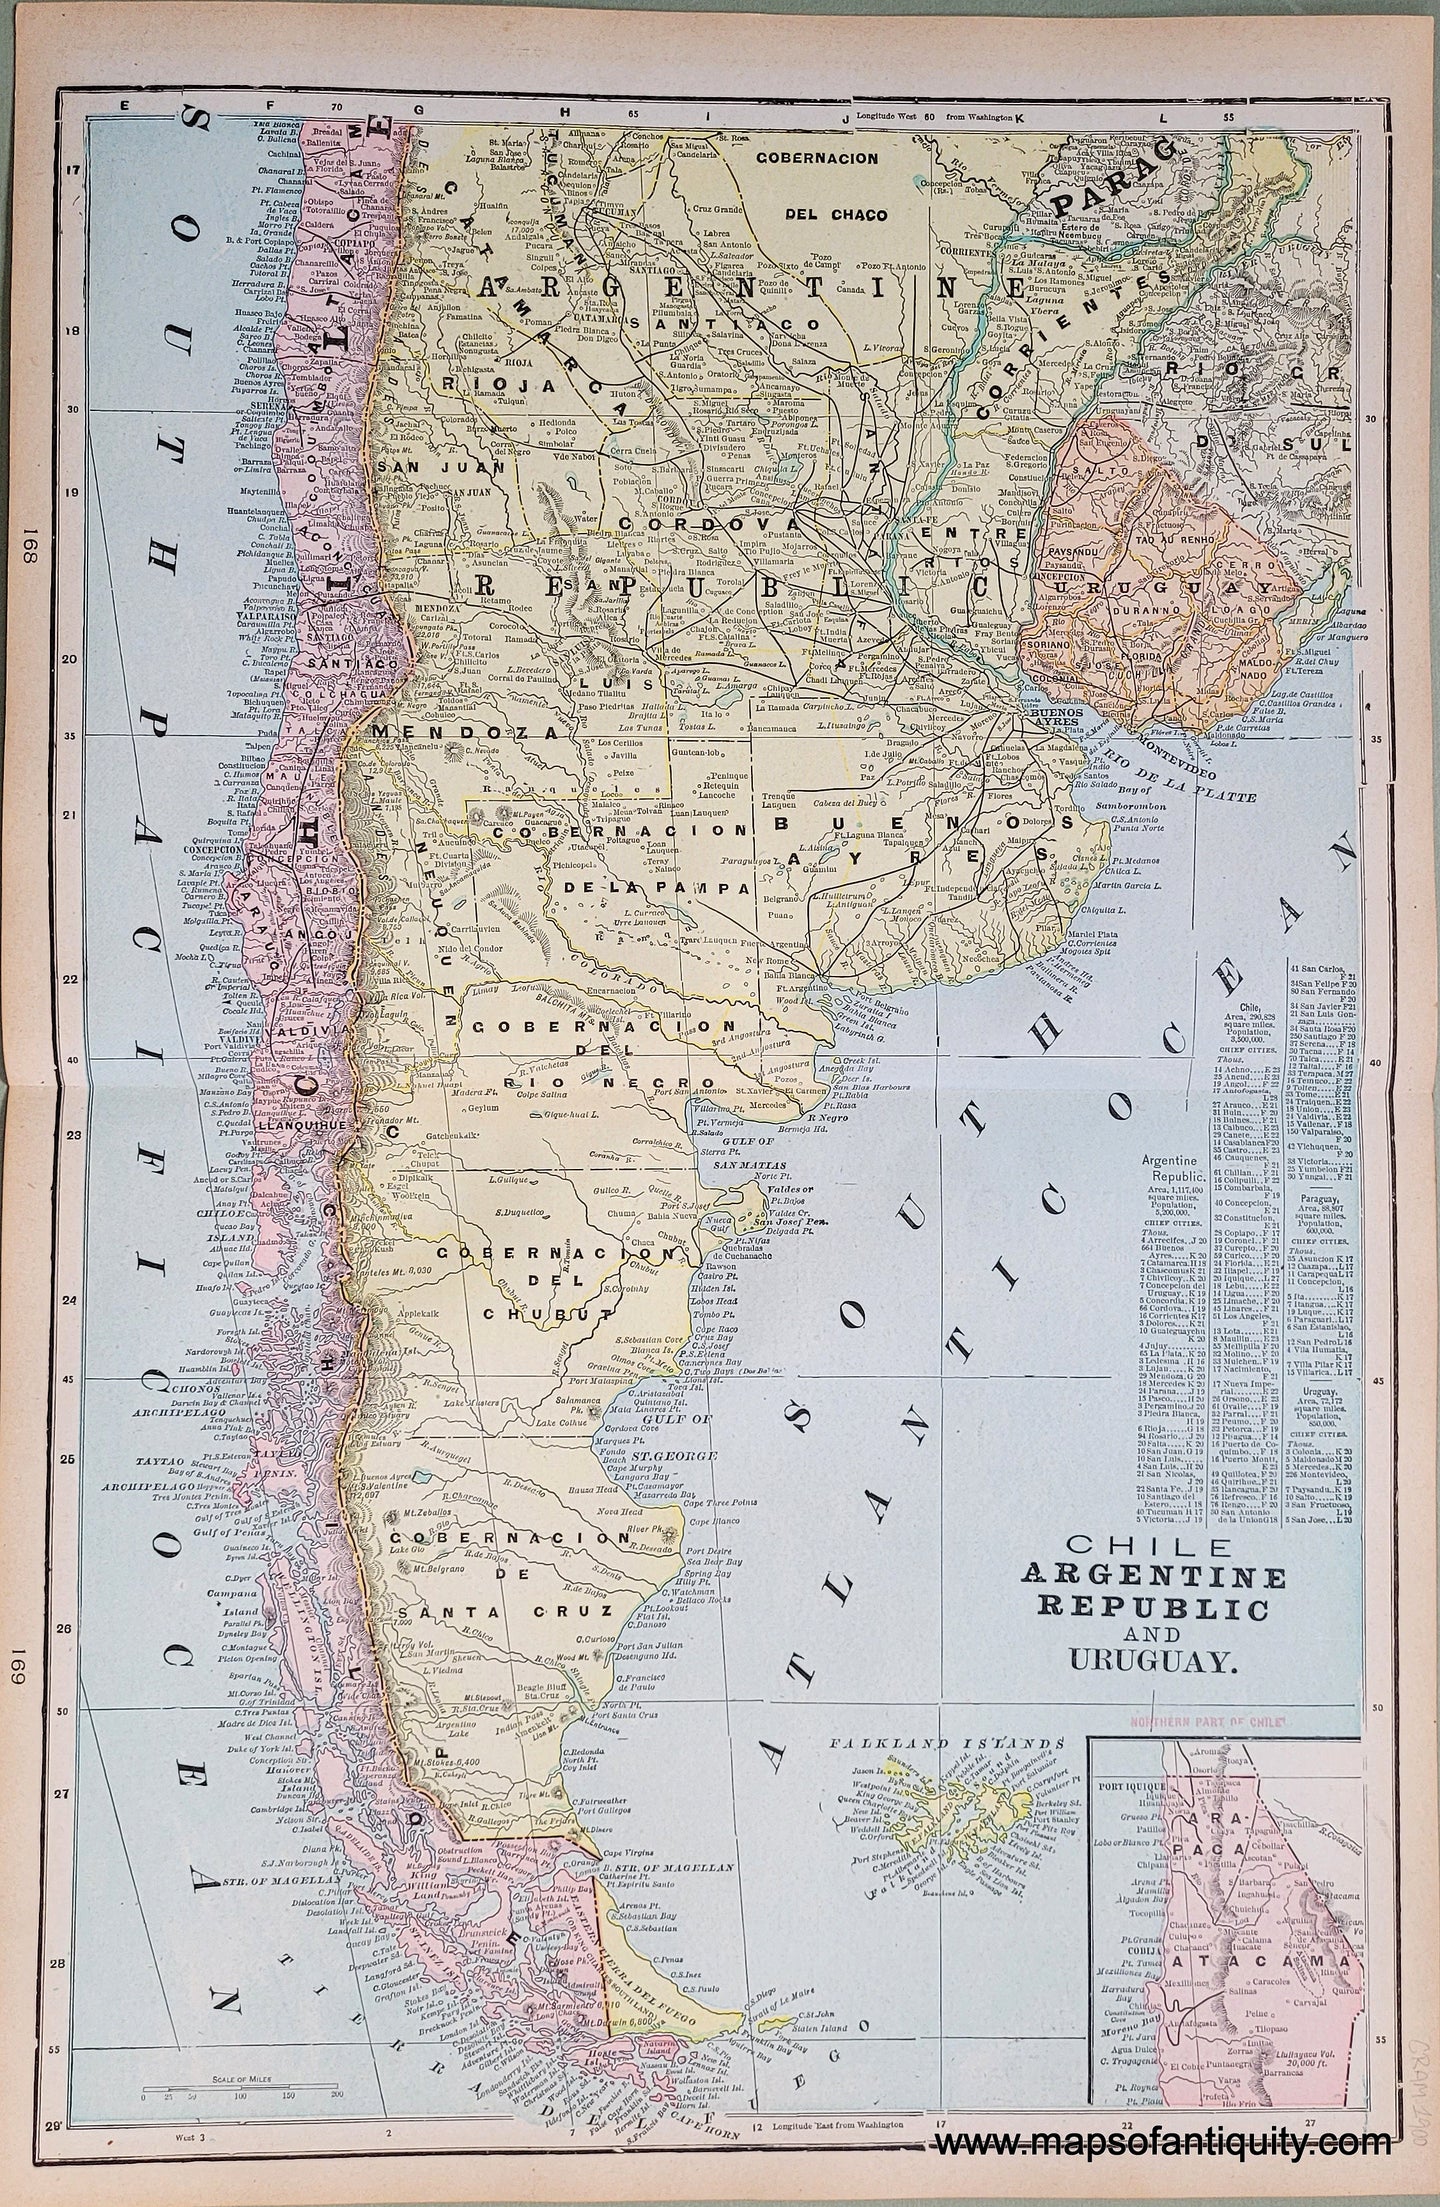 Antique-Printed-Color-Map-Chile-Argentine-Republic-and-Uruguay-verso:-Peru-and-Islands-in-The-Pacific-Ocean-**********-Caribbean-&-Latin-America-South-America-1900-Cram-Maps-Of-Antiquity